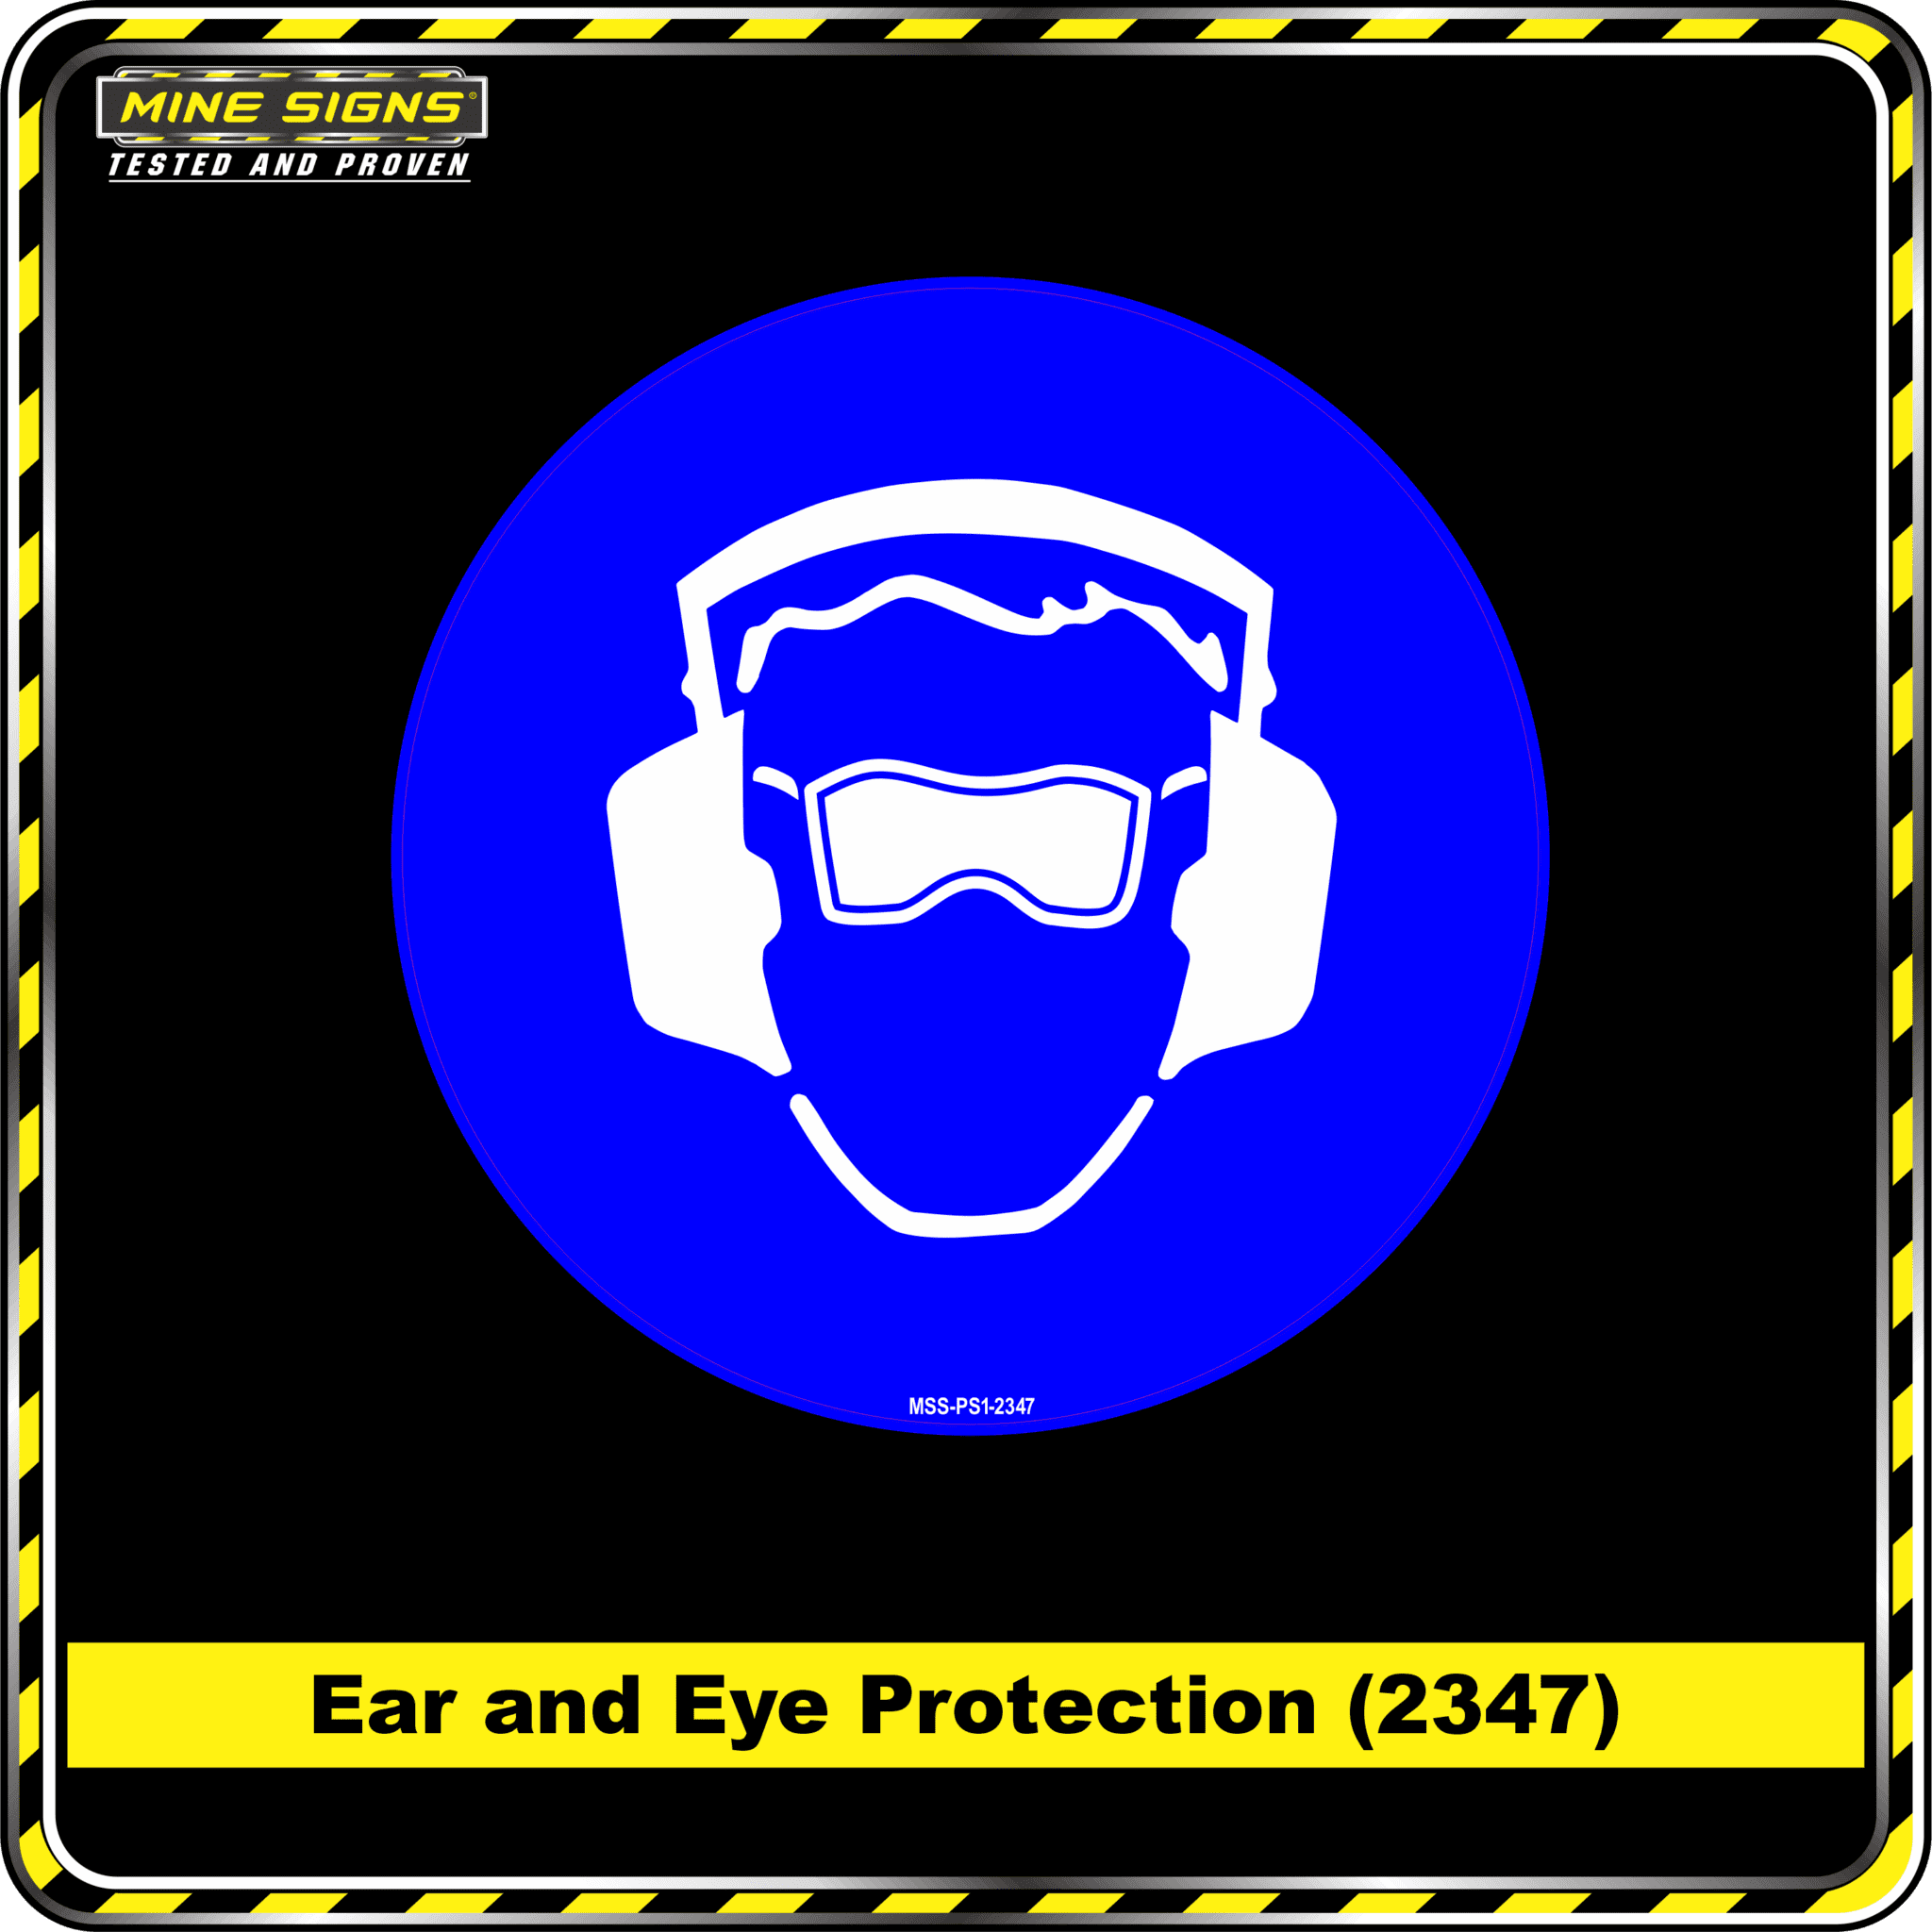 MS - Product Background - Safety Signs - Ear and Eye Protection 2347